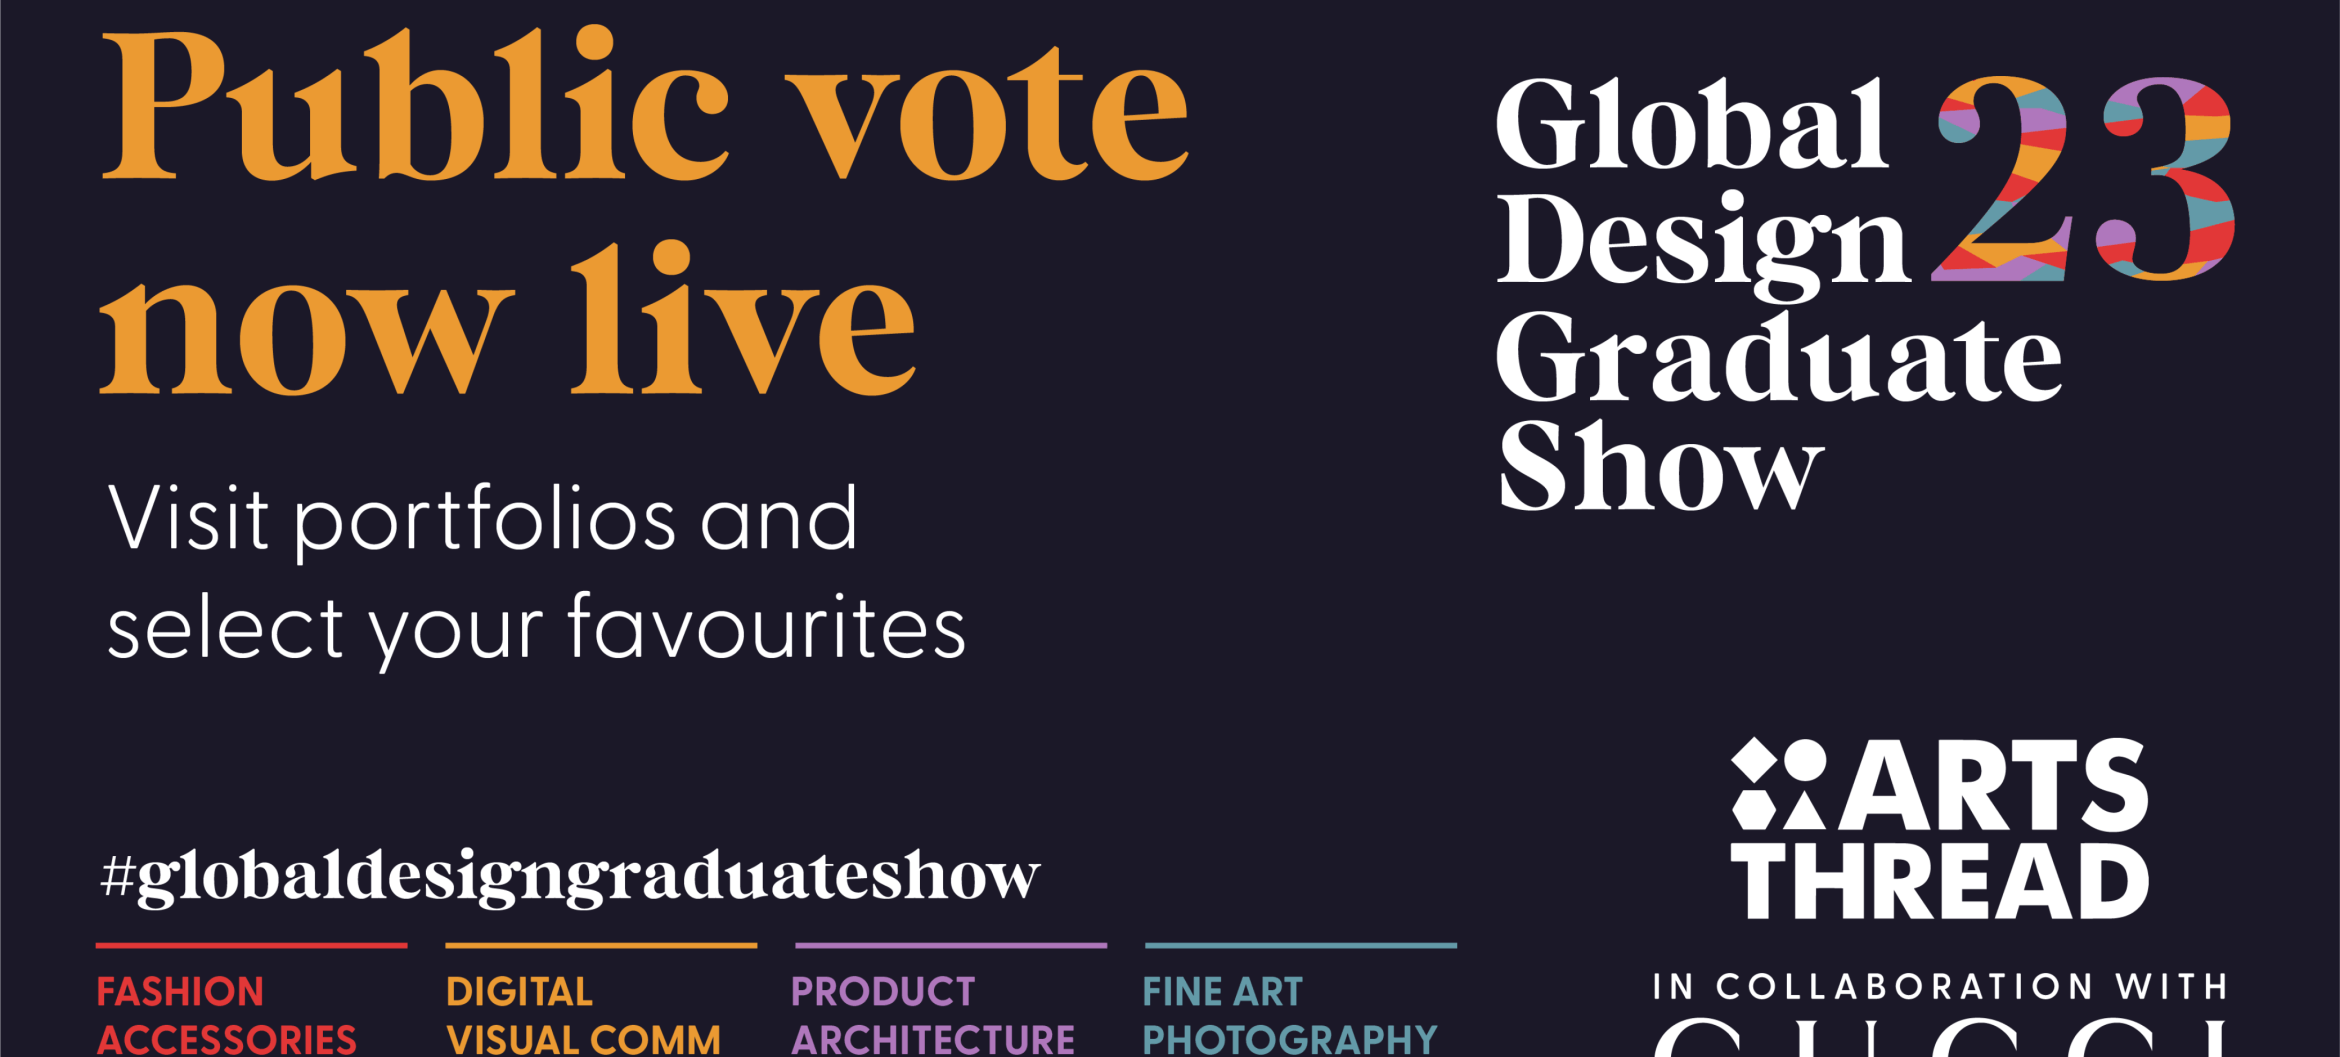 Vote for our students! Who will win the Global Design Graduate Show 2023?